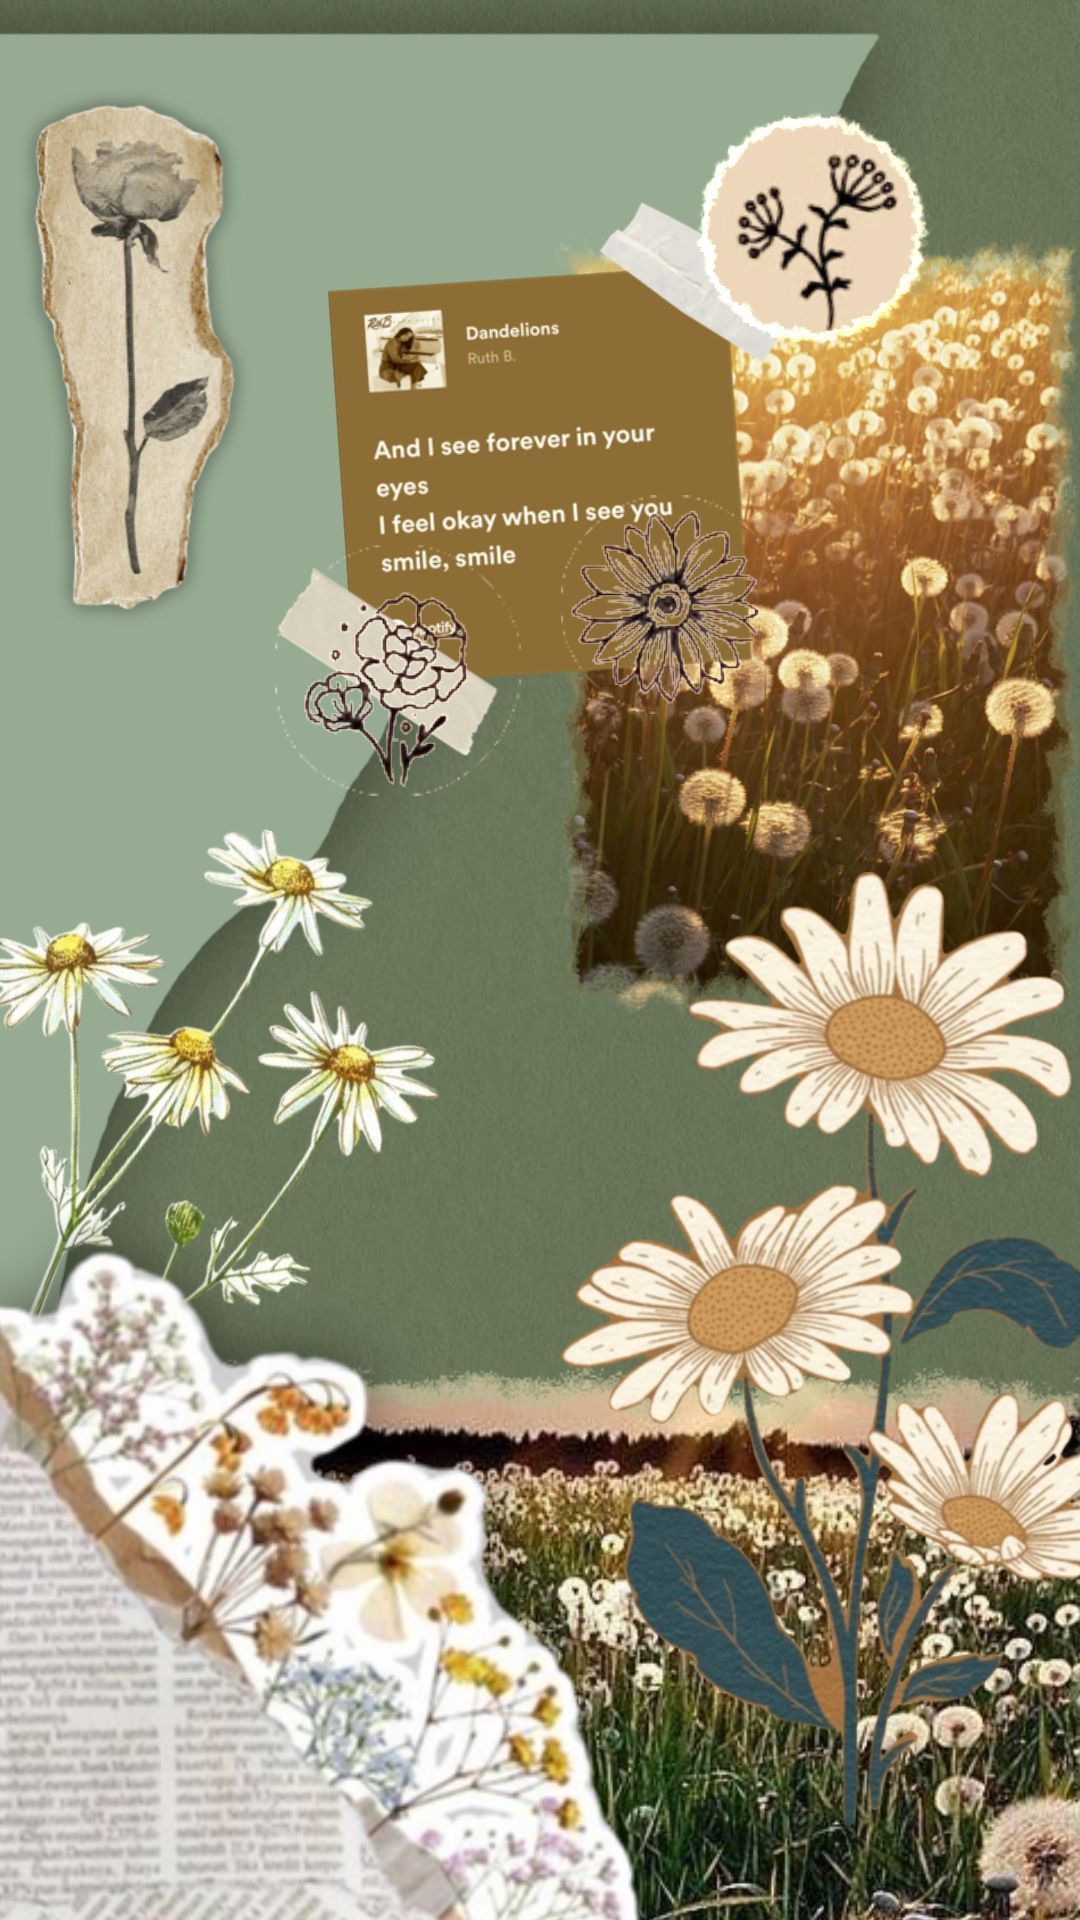 Collage of daisies, a field, and a page from a book - Dandelions